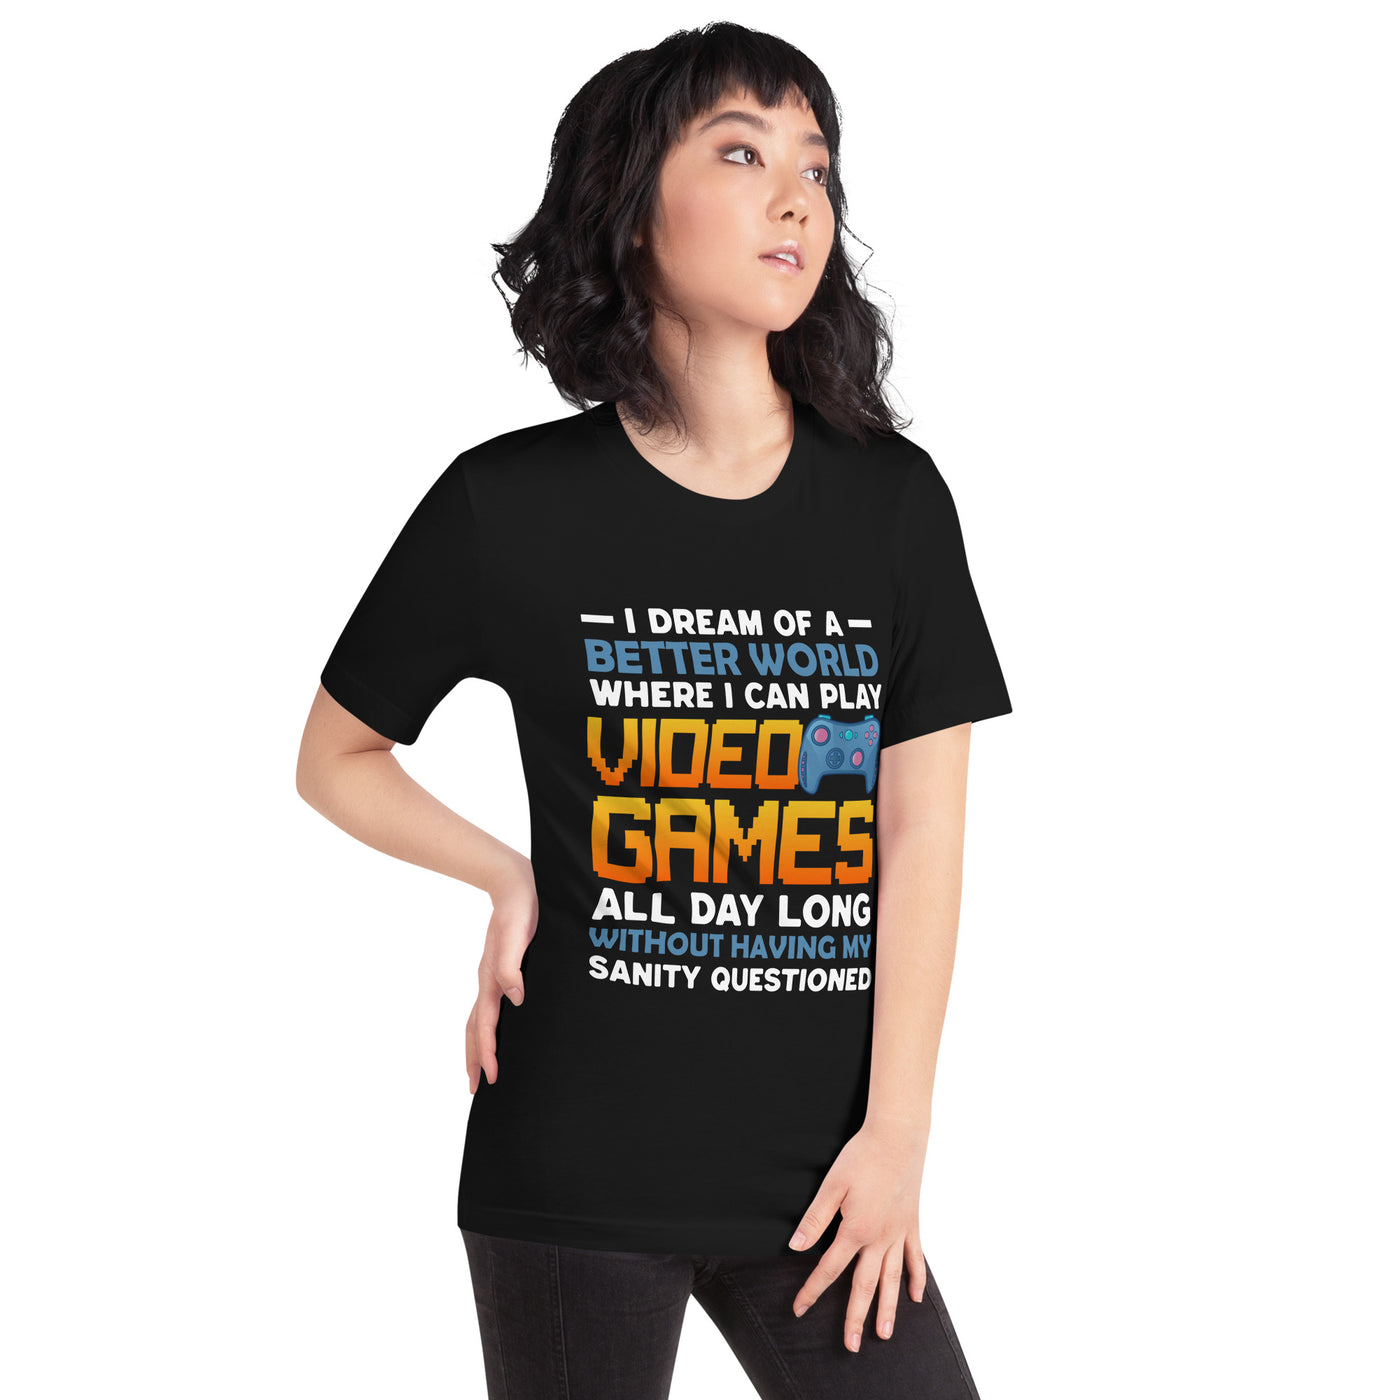 I Dream of a Better World where I can Play Video Games - Unisex t-shirt